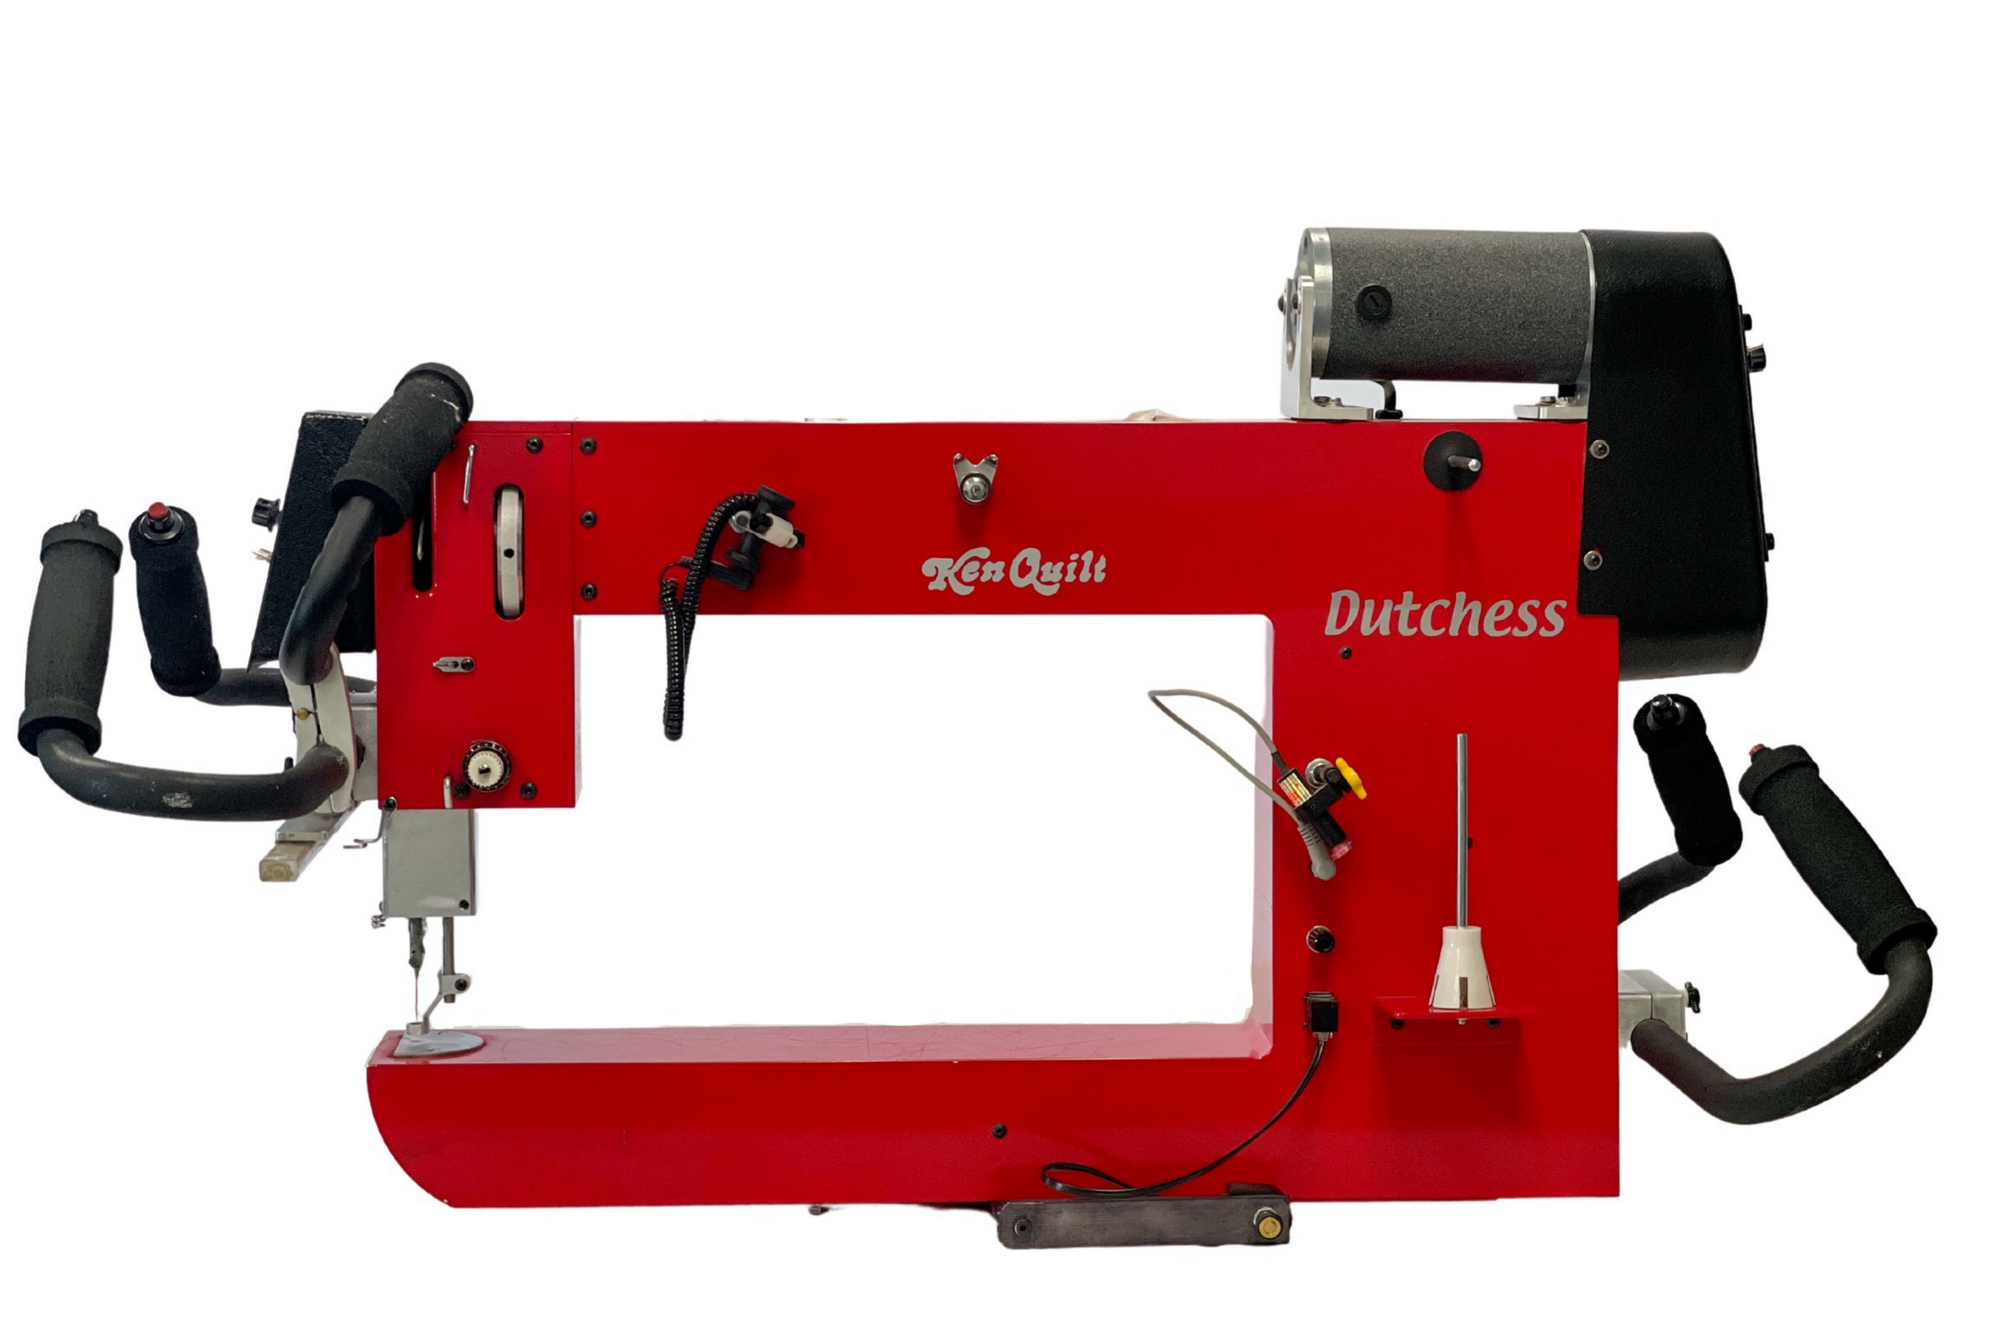 What Makes a Quilting Machine Different from a Sewing Machine? - Janome